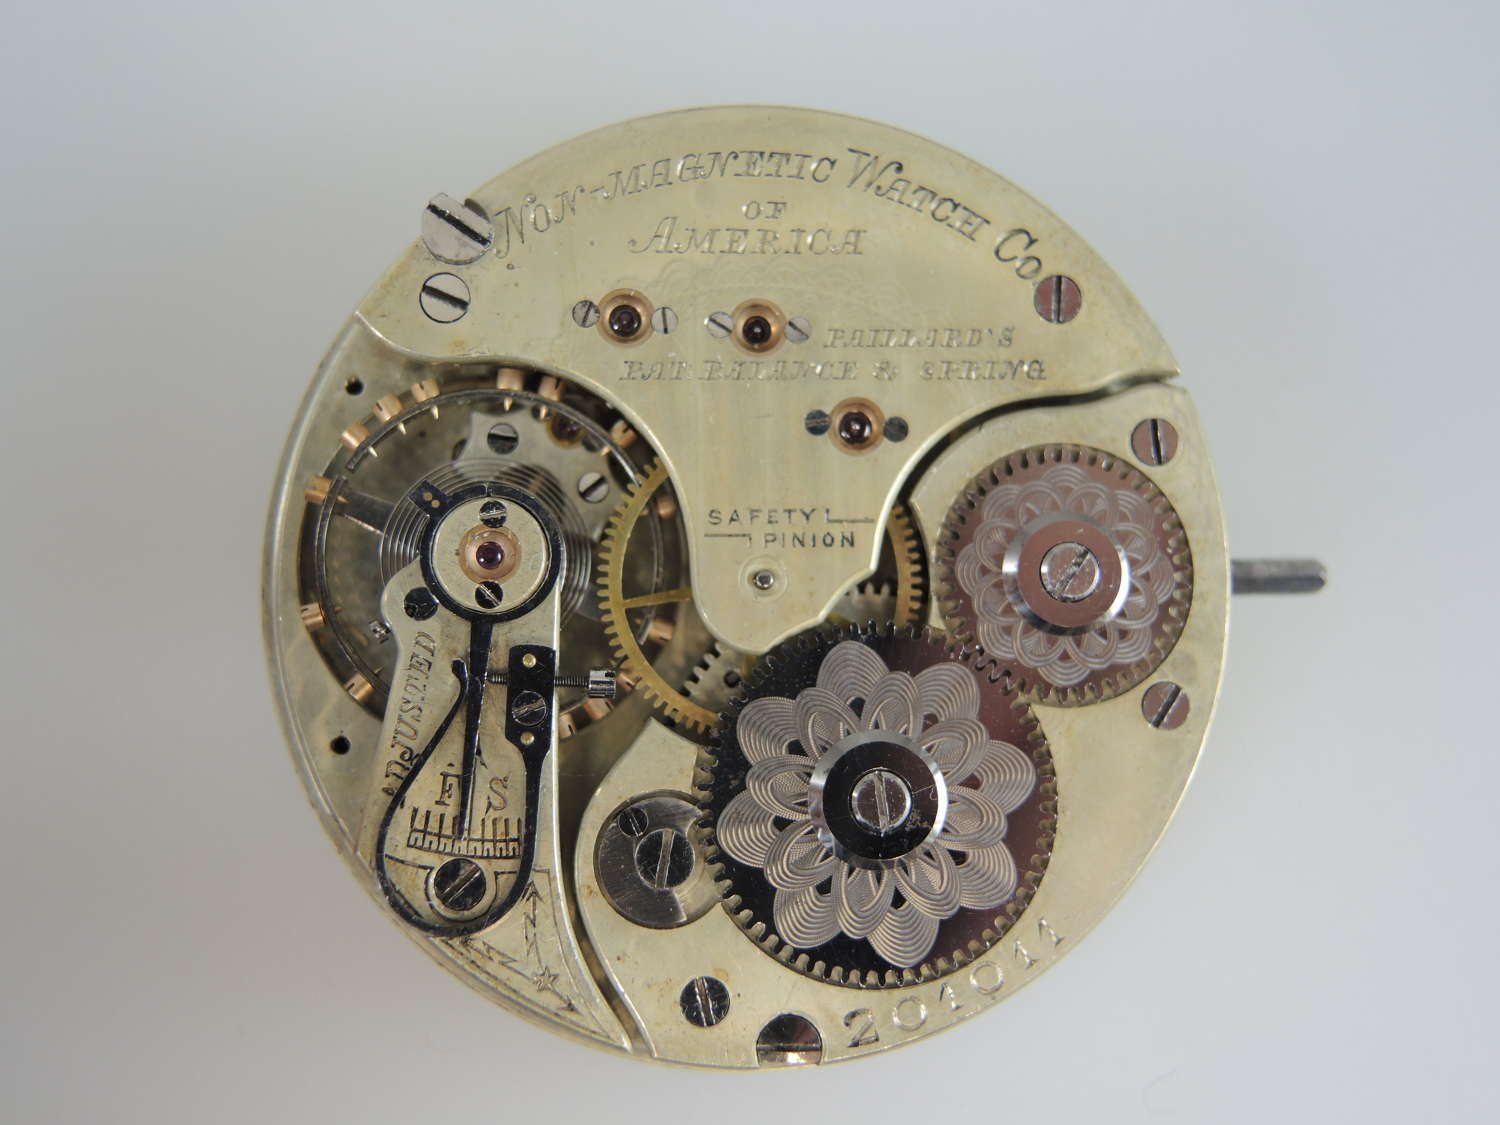 Swiss Non magnetic Watch Co of America pocket watch movement c1890